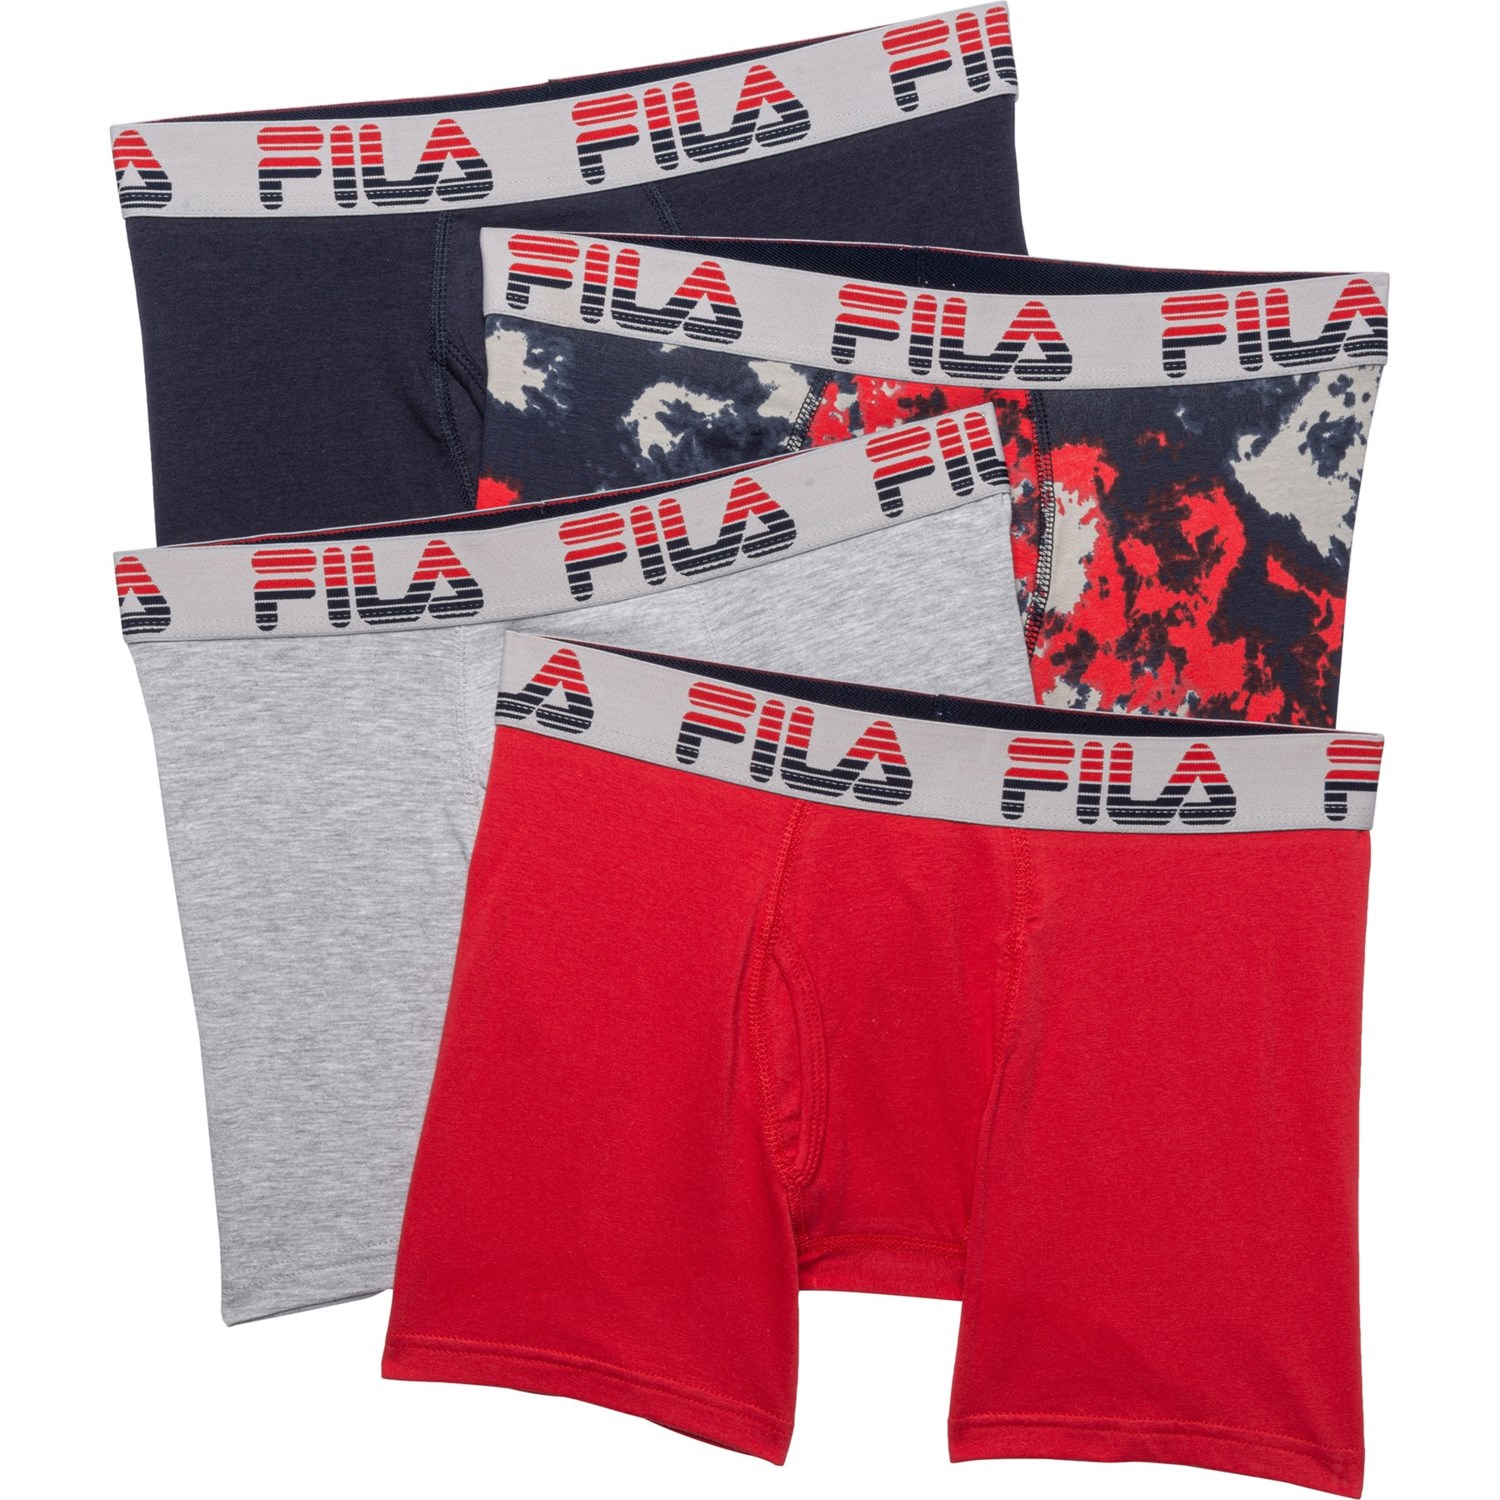 Fila Ultrasoft Cotton Stretch Boxer Briefs with Fly (For Men) - Save 48%